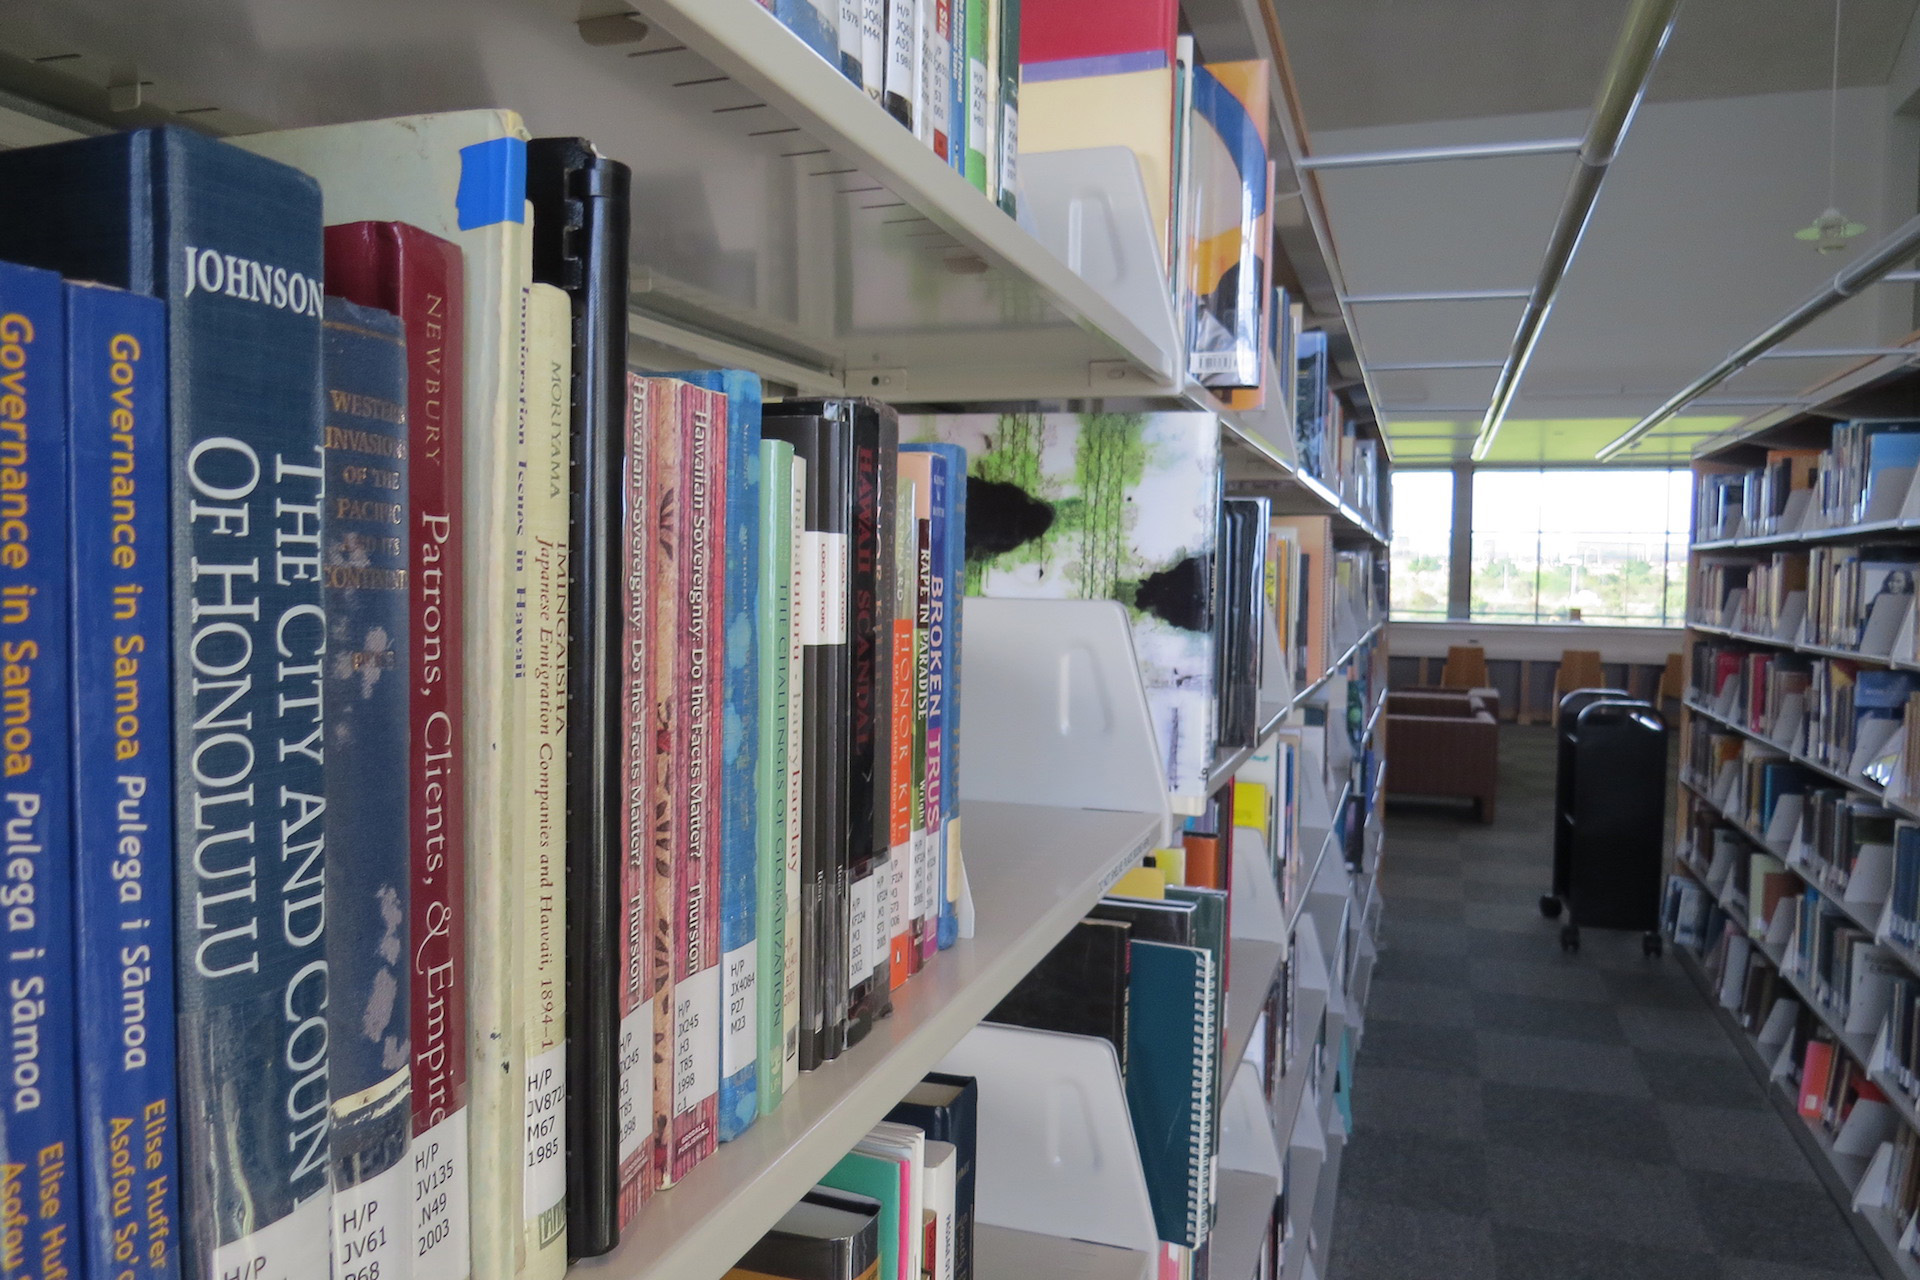 Books on the shelves in the Library stacks.